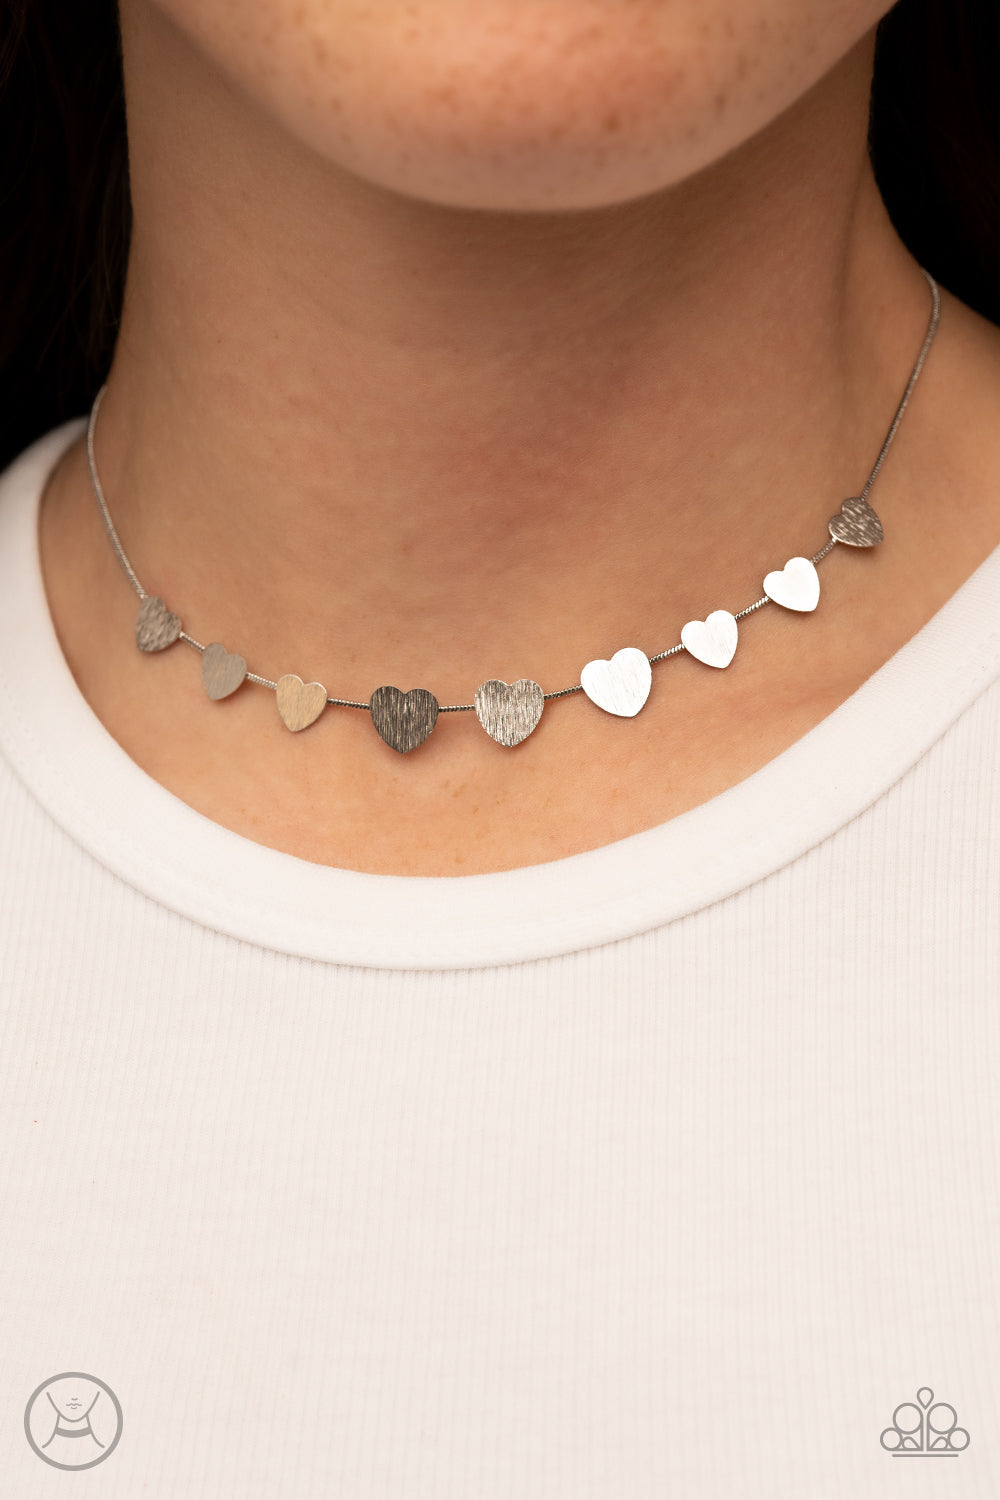 Dainty Desire - Silver Heart Choker Necklace - Paparazzi Accessories - a dainty collection of flat silver heart frames gradually increases in size along a shiny silver snake chain around the neck for a flirtatious fashion. Features an adjustable clasp closure. Bejeweled Accessories By Kristie - Trendy fashion jewelry for everyone -